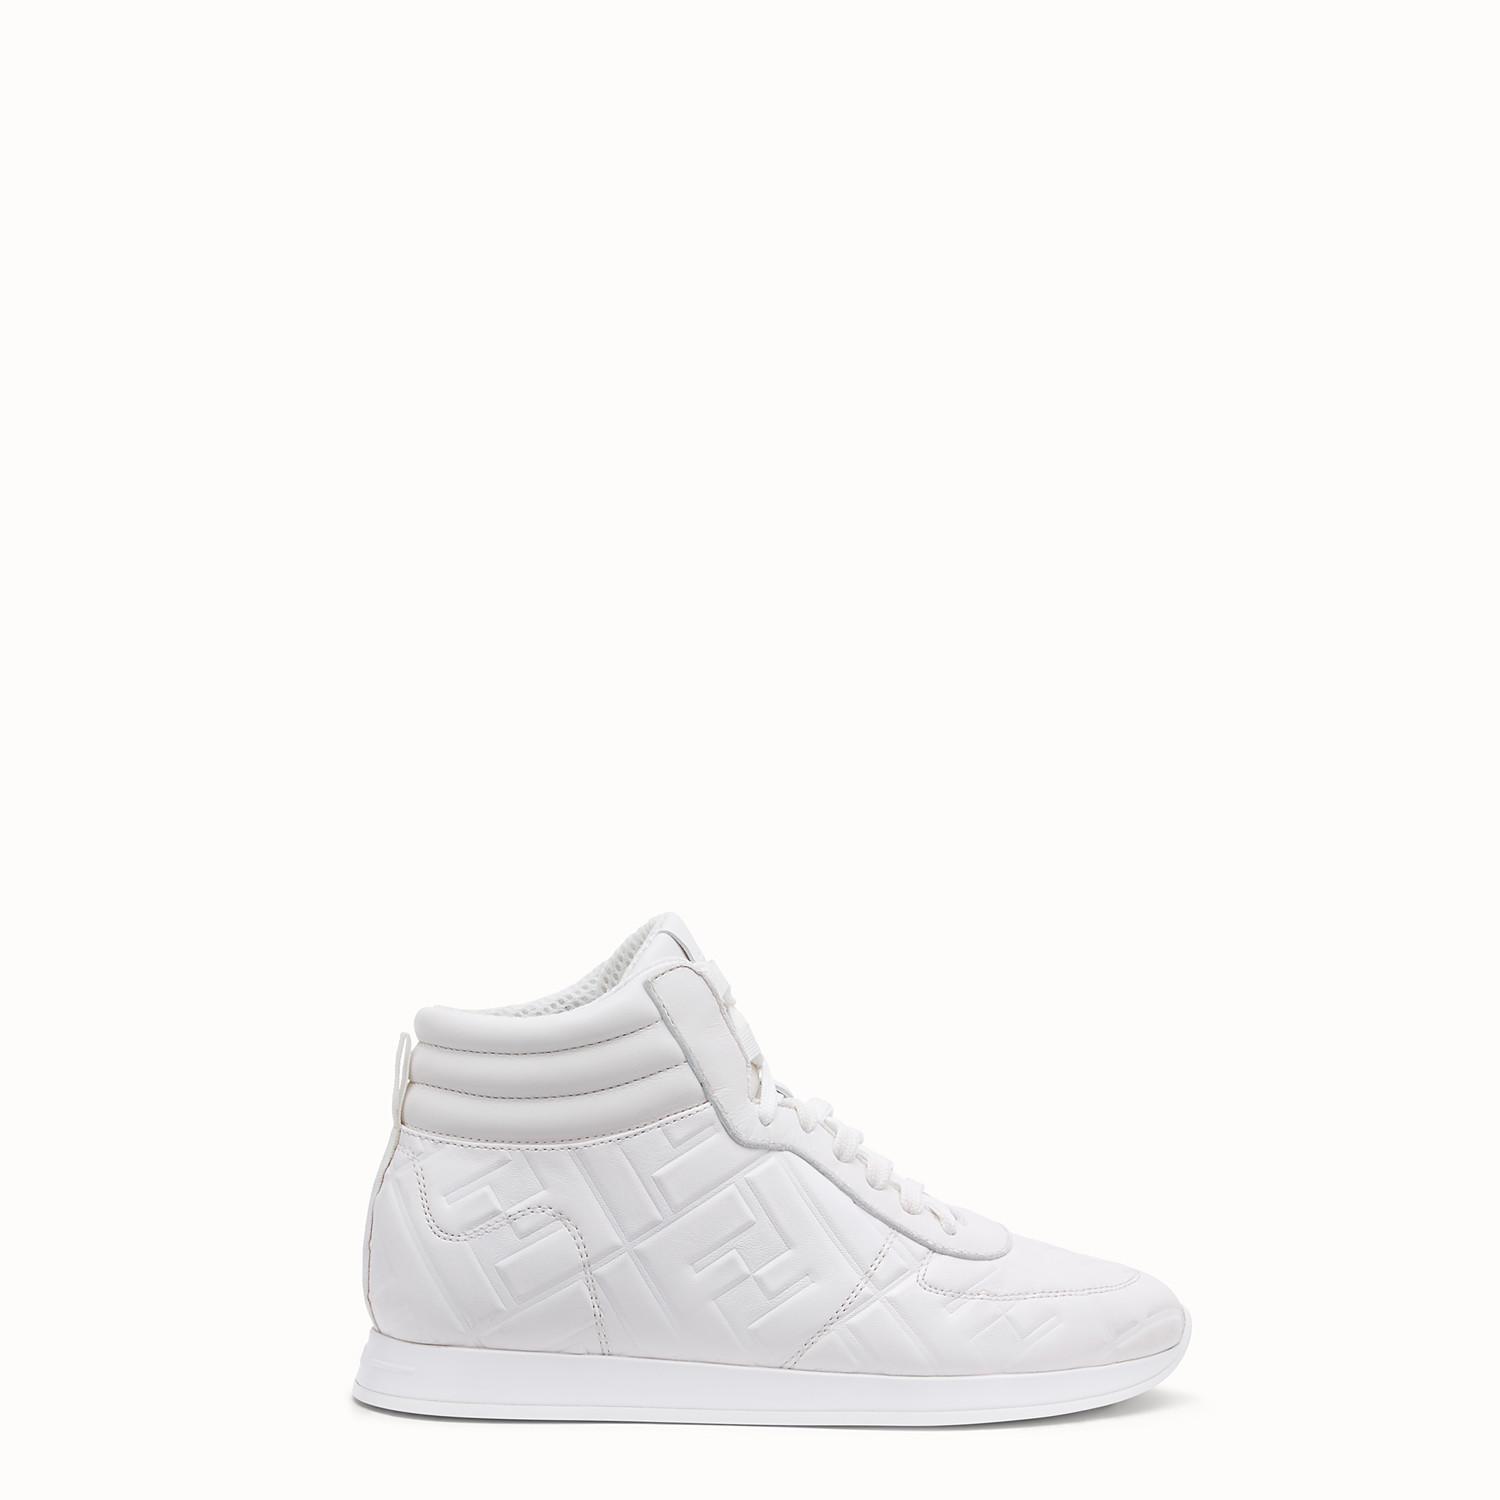 Fendi Leather Sneakers in White - Lyst